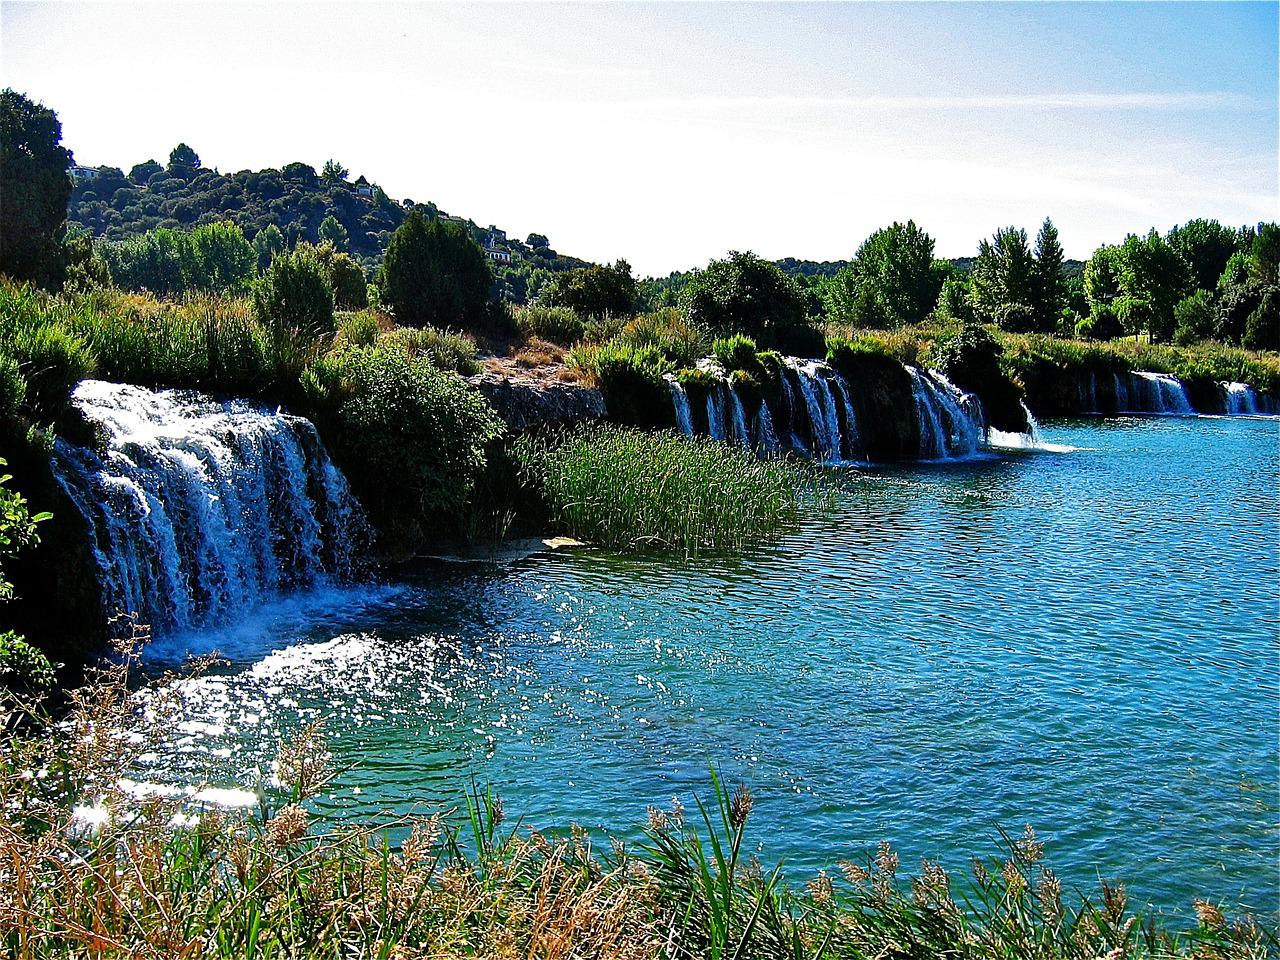 Plitvice Lakes National Park and Ruidera Lakes in Spain collaborate 